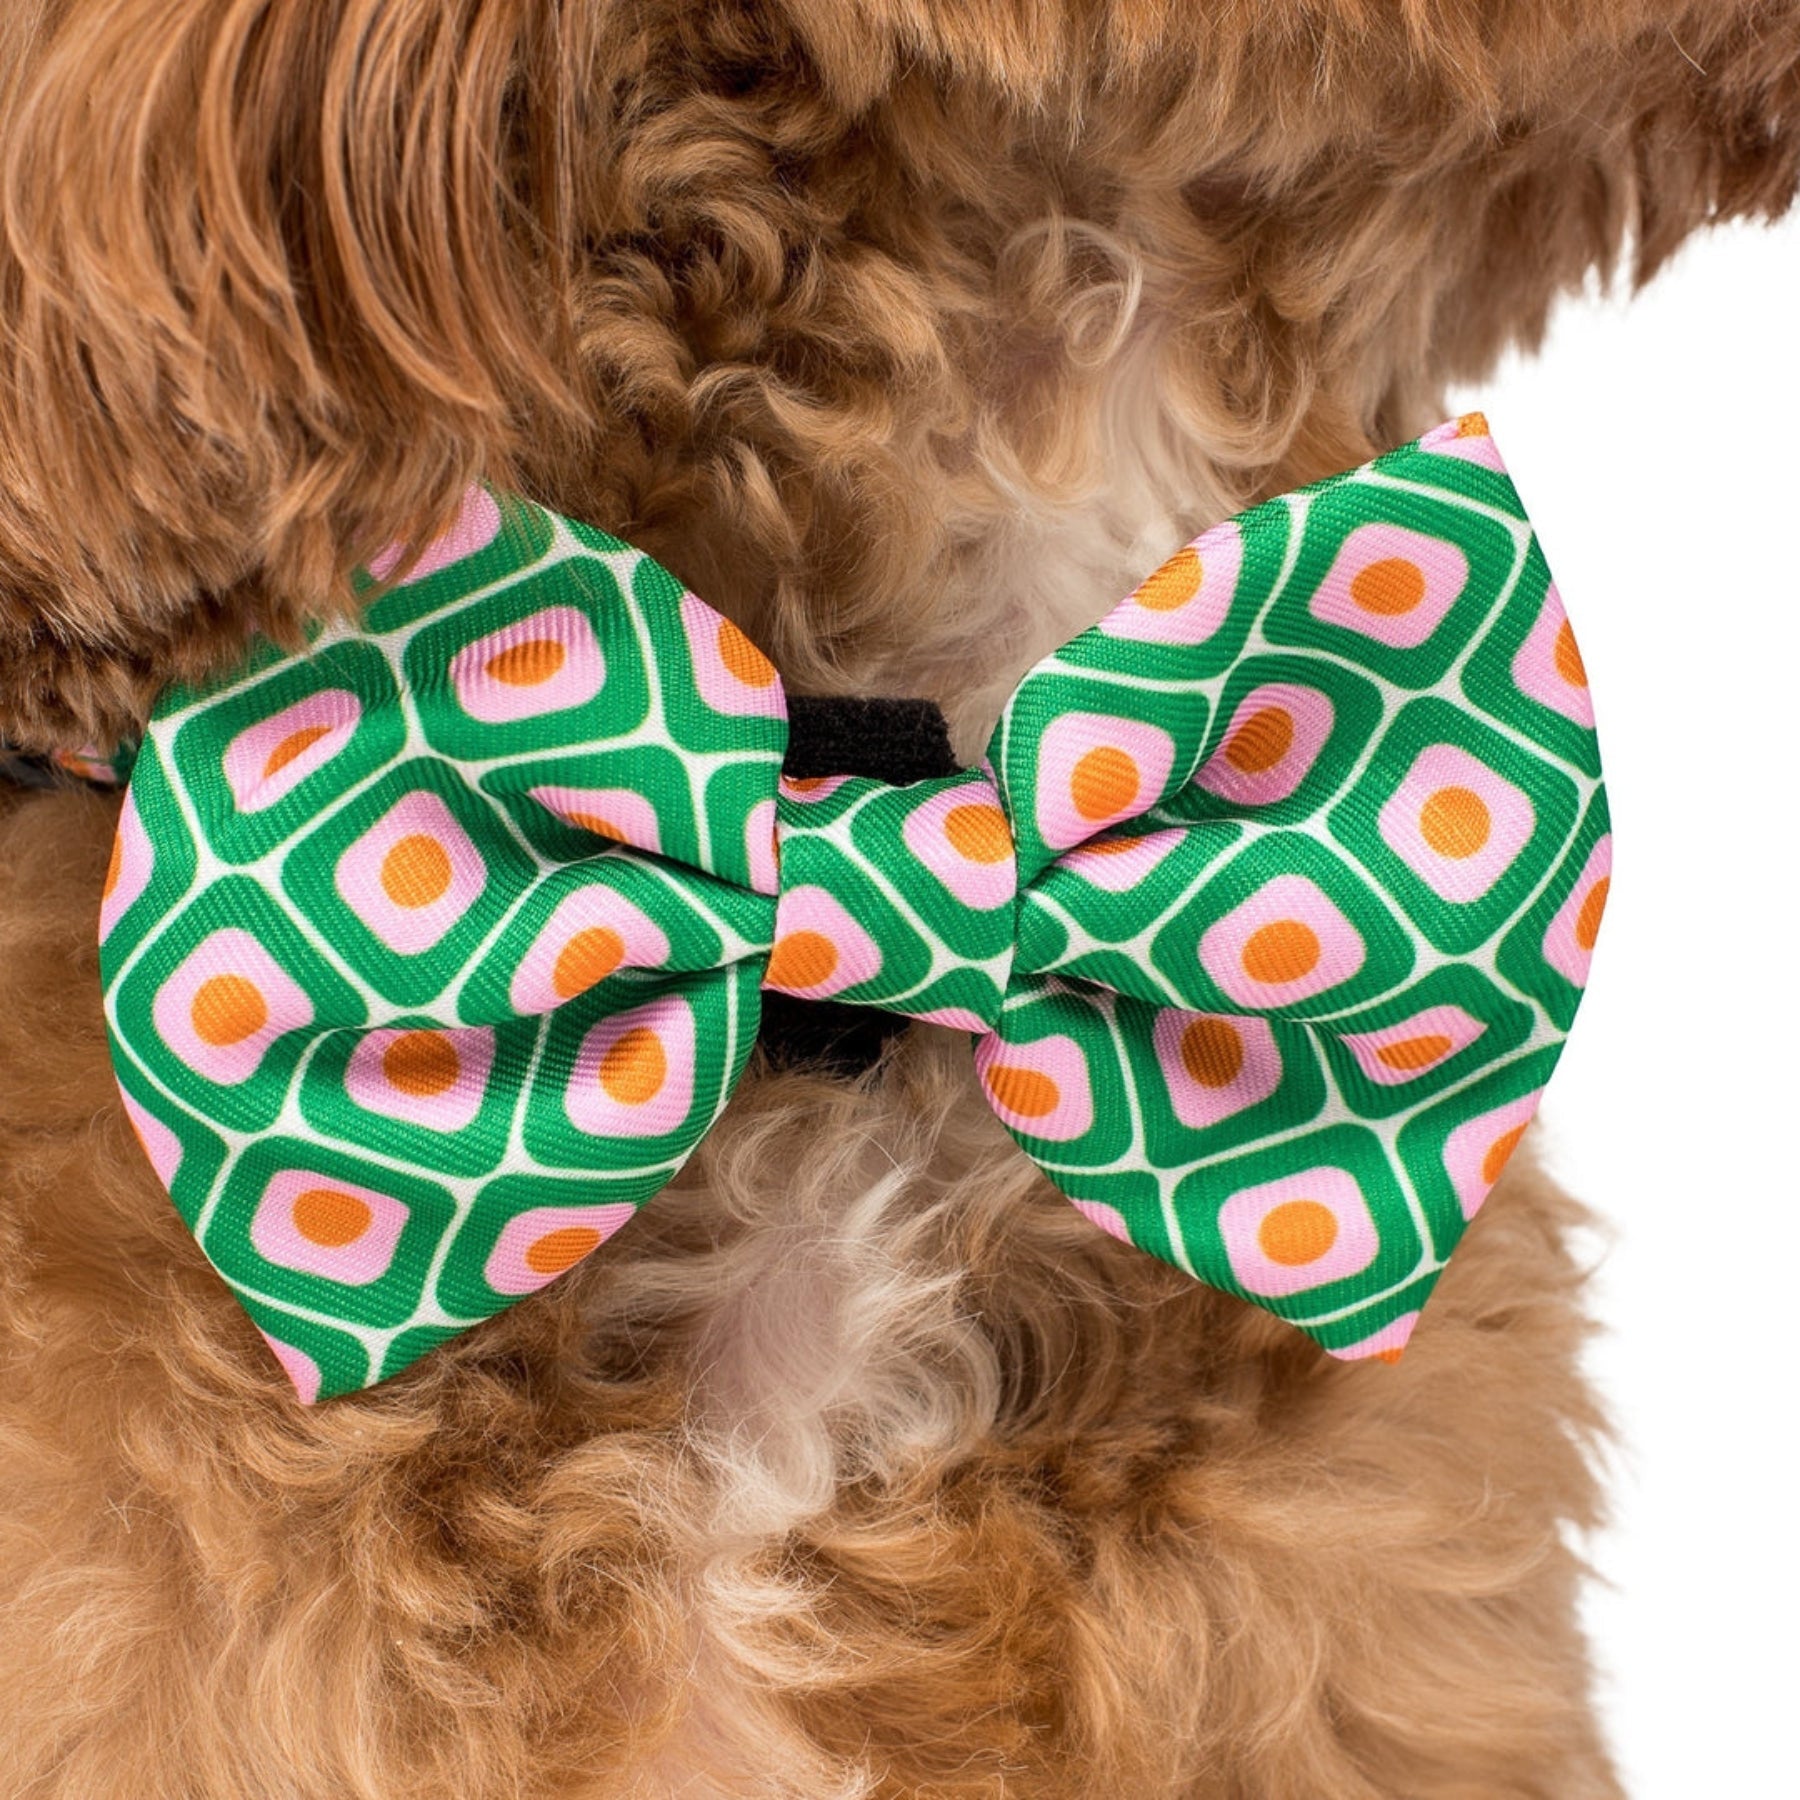 70's Style Bow Tie - Pooch Luxury